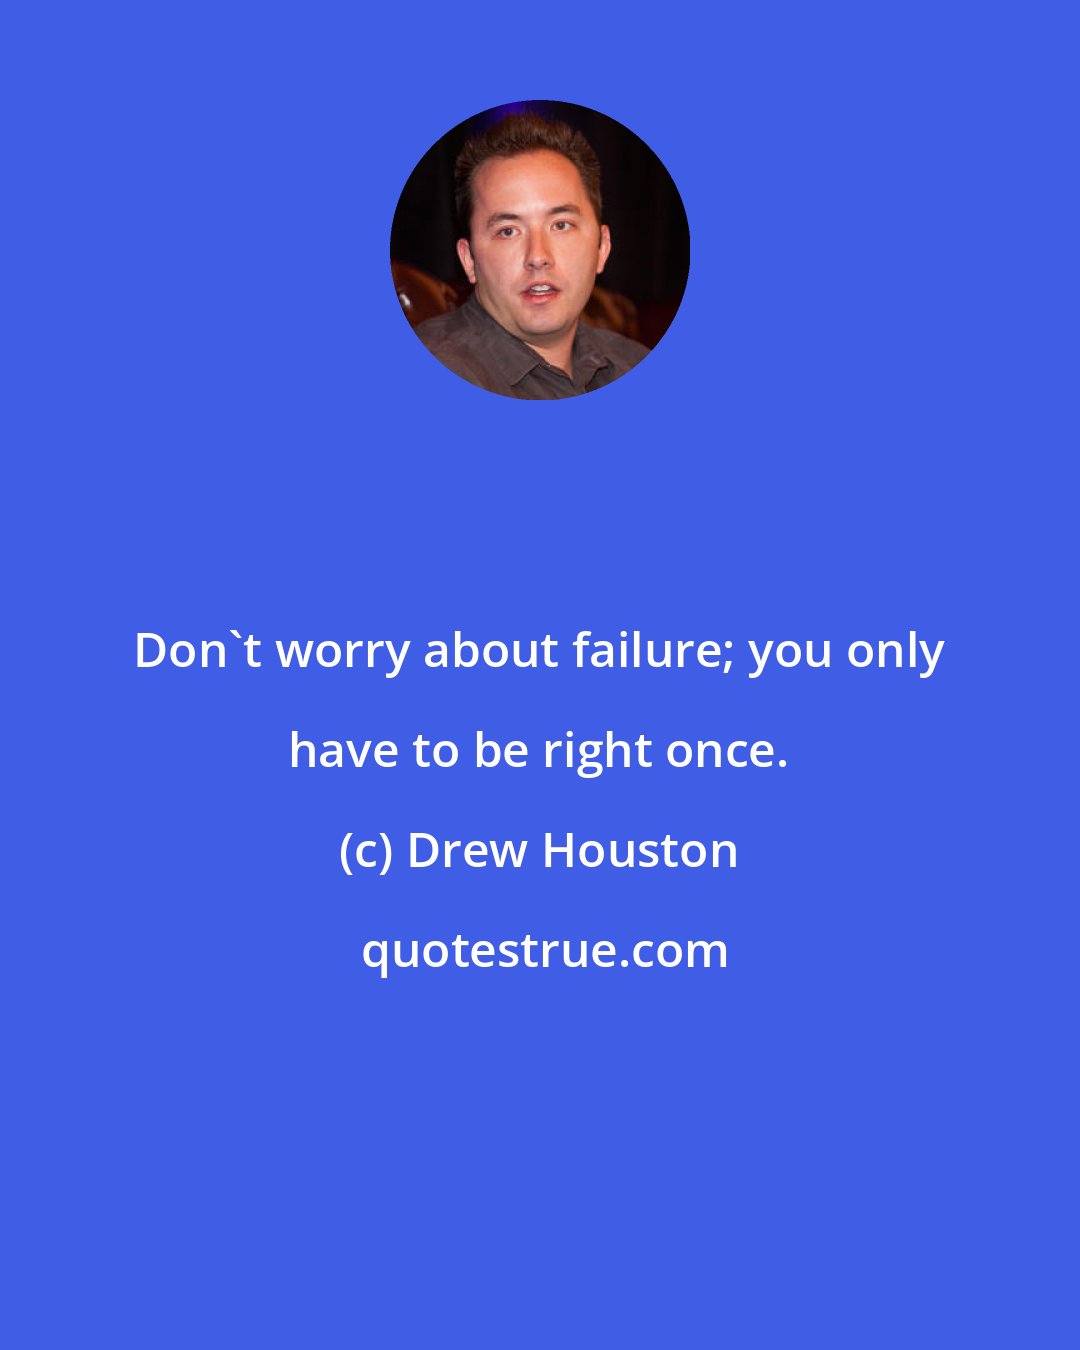 Drew Houston: Don't worry about failure; you only have to be right once.